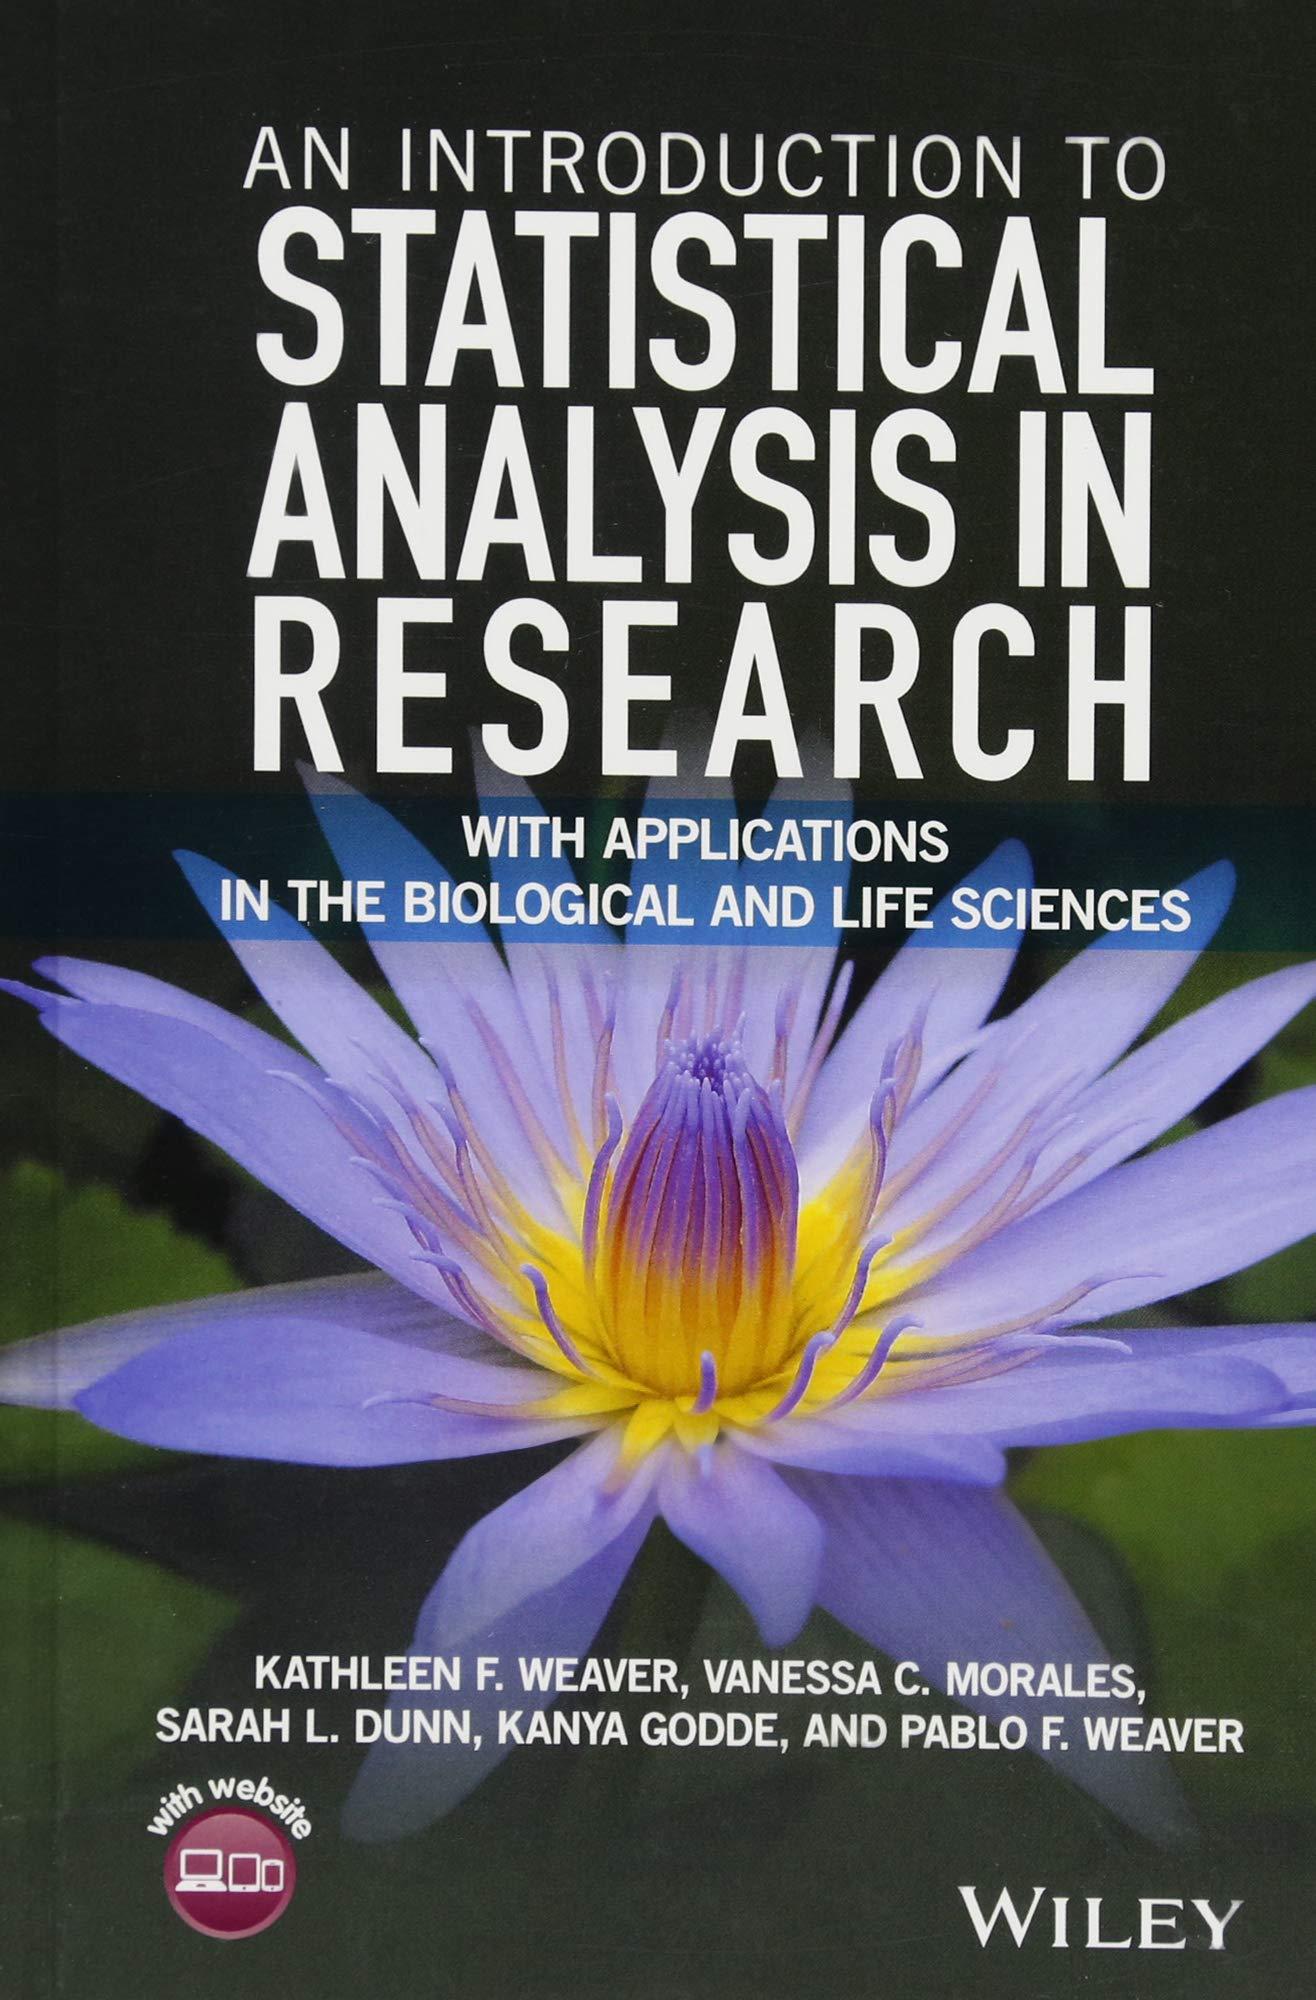 an introduction to statistical analysis in research 1st edition kathleen f. weaver, vanessa c. morales, sarah